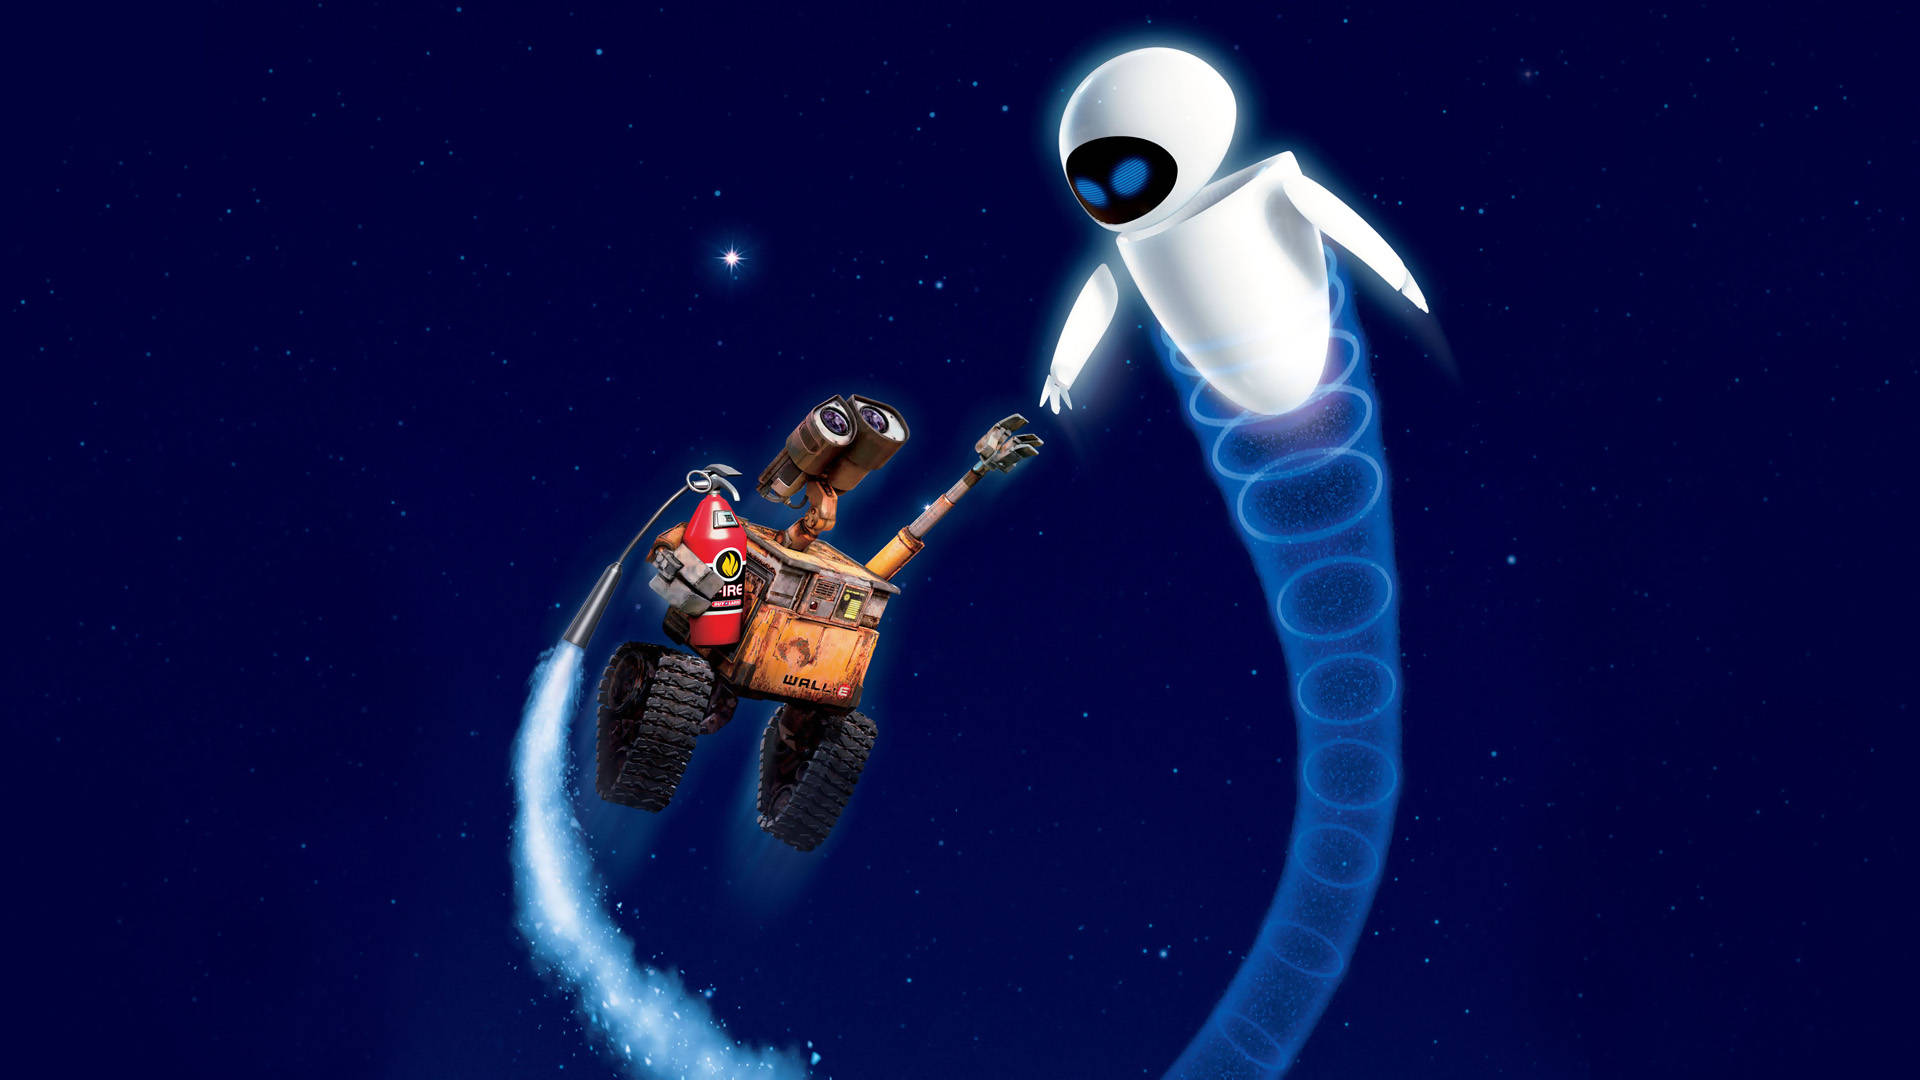 WALL E And EVE In The Galaxy Wallpaper